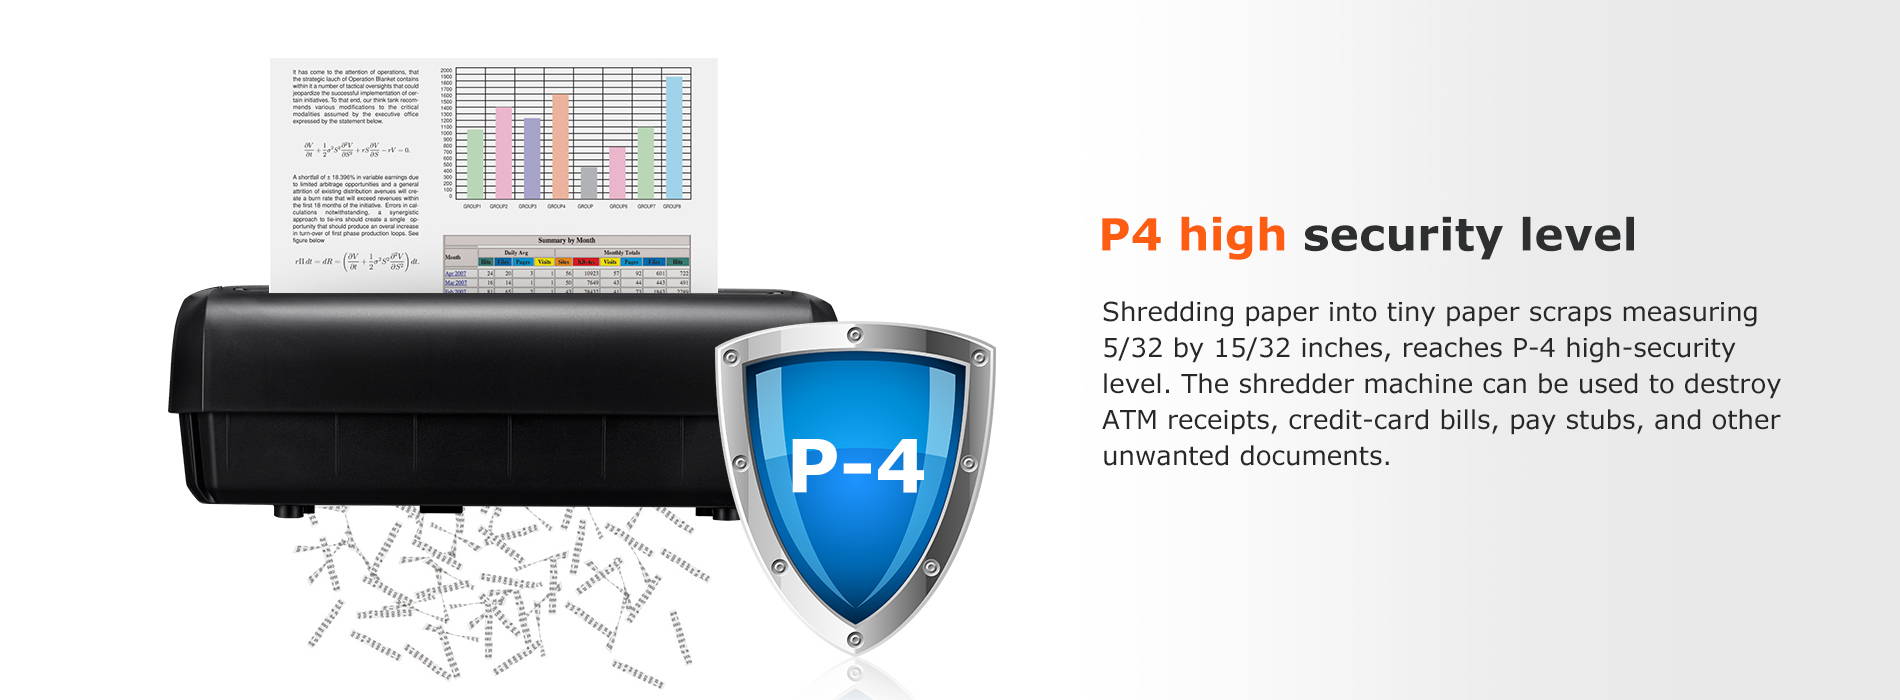 P4 high security level Shredding paper into tiny paper scraps measuring 5/32 by 15/32 inches, reaches P-4 high-security level. The shredder machine can be used to destroy ATM receipts, credit-card bills, pay stubs, and other unwanted documents.